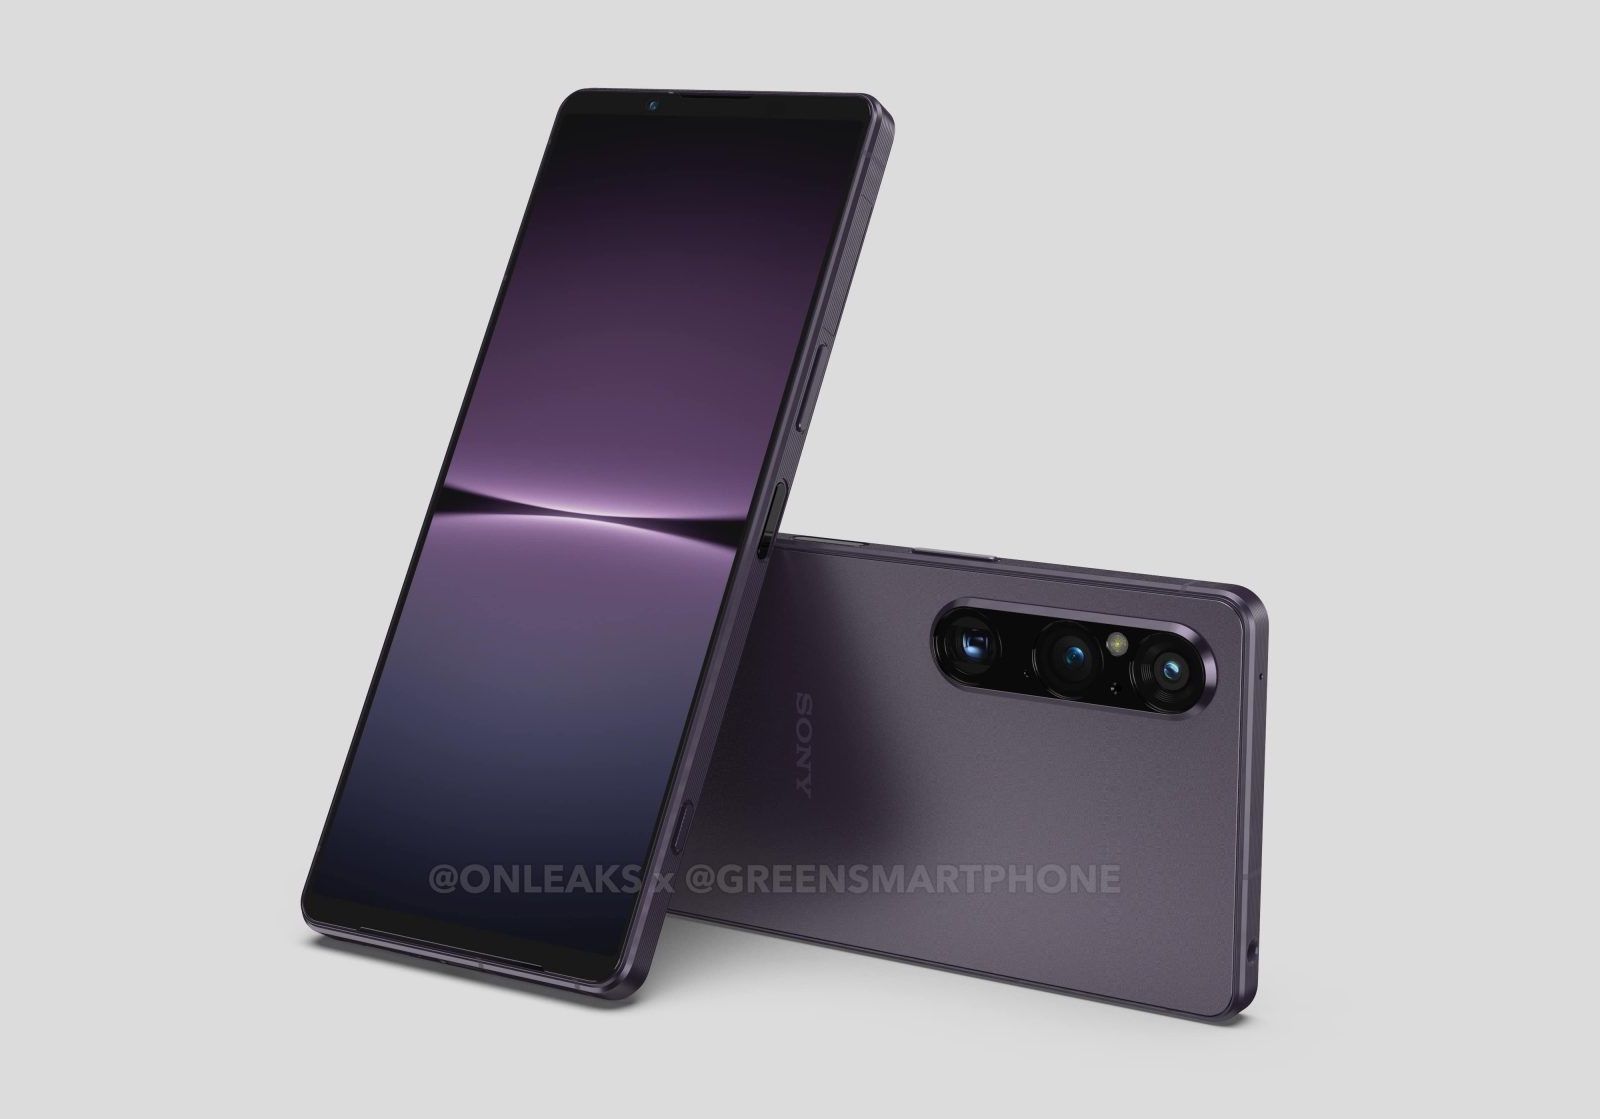 Sony Xperia 1 V render with phone leaning on another phone